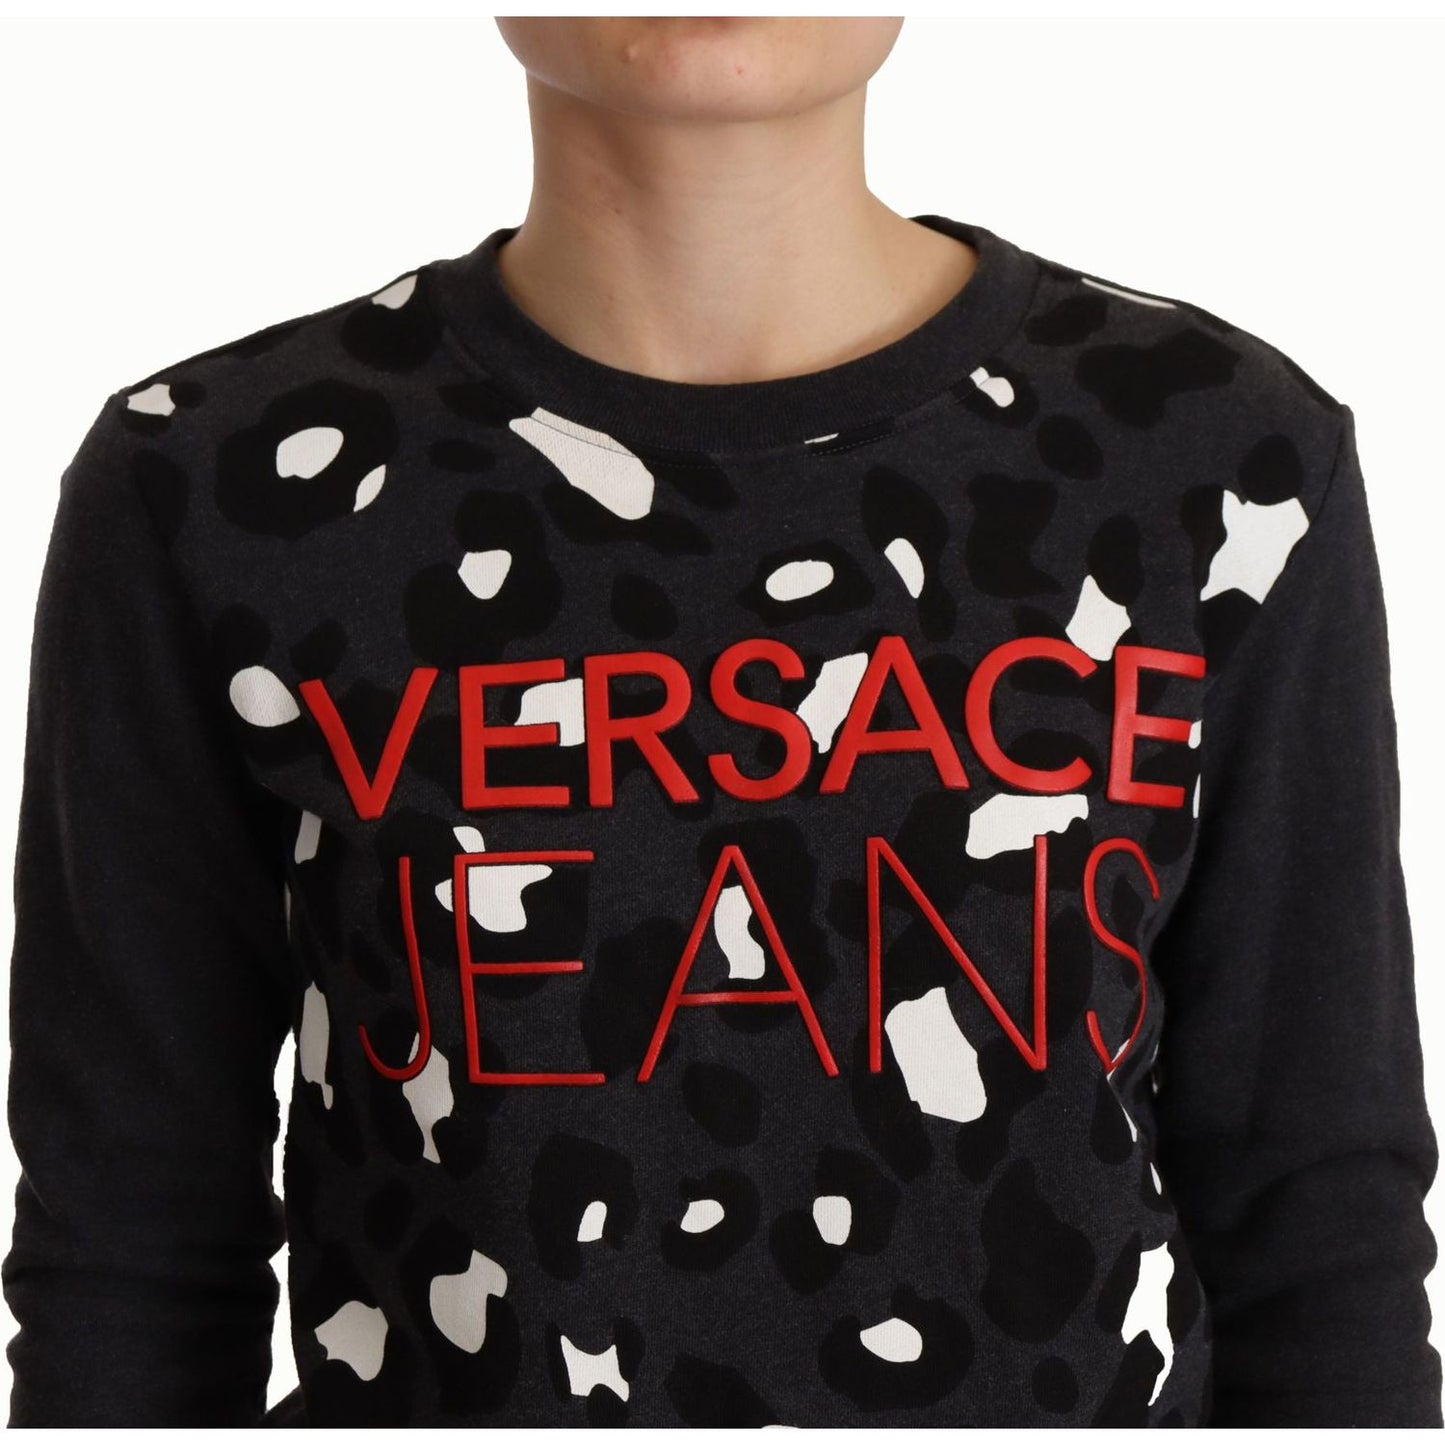 Versace Jeans Chic Black Leopard Crew Neck Pullover black-cotton-leopard-long-sleeves-pullover-sweater IMG_6670-scaled-8233ede1-35b.jpg